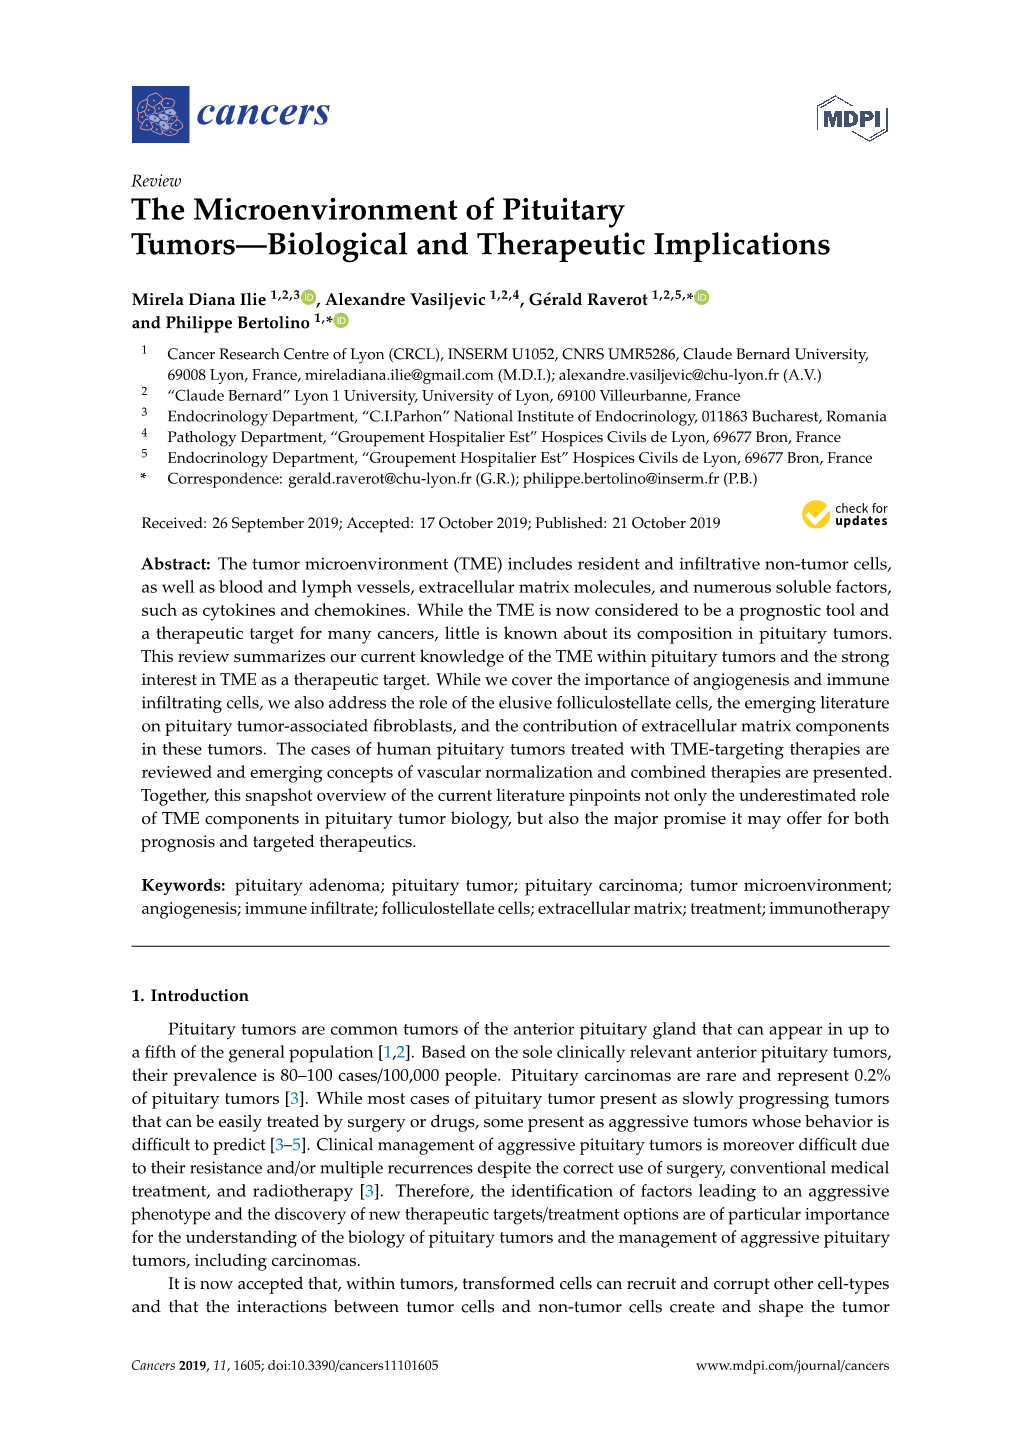 The Microenvironment of Pituitary Tumors—Biological and Therapeutic Implications